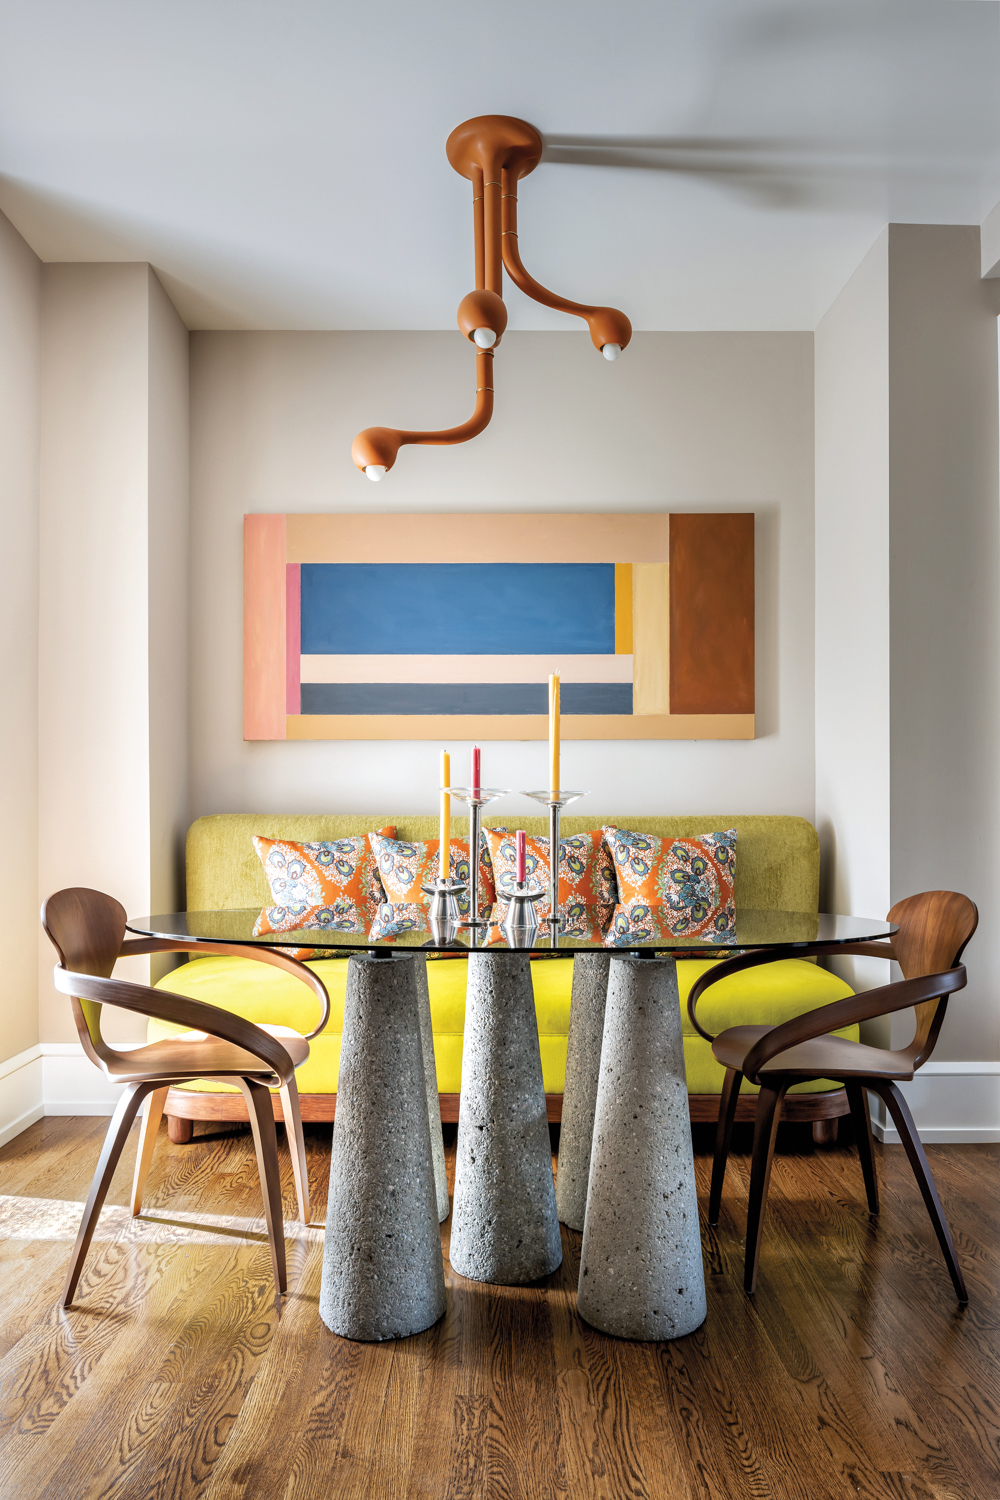 Sculptural lighting above a cement pillared dining table and chartreuse banquette seating